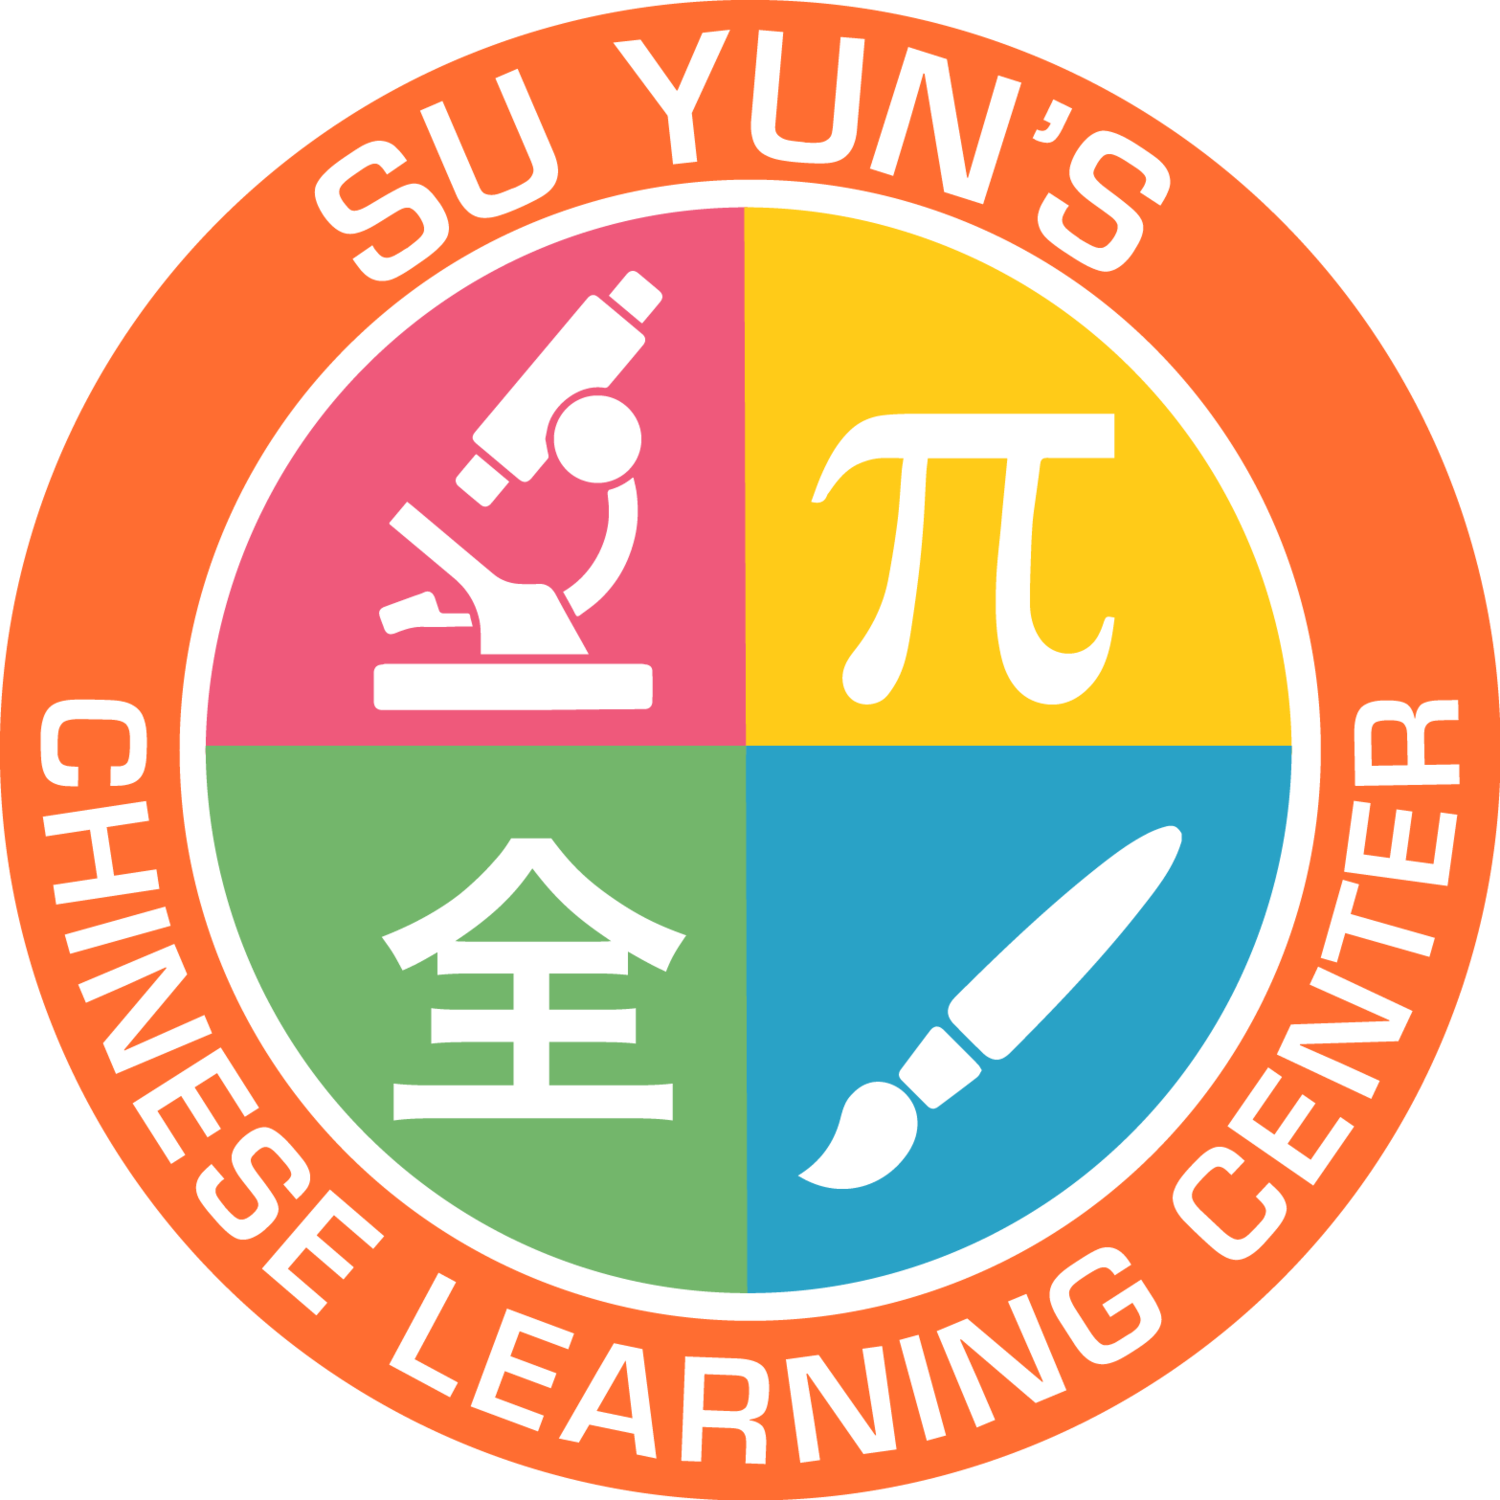 Su Yun's Chinese Learning Center